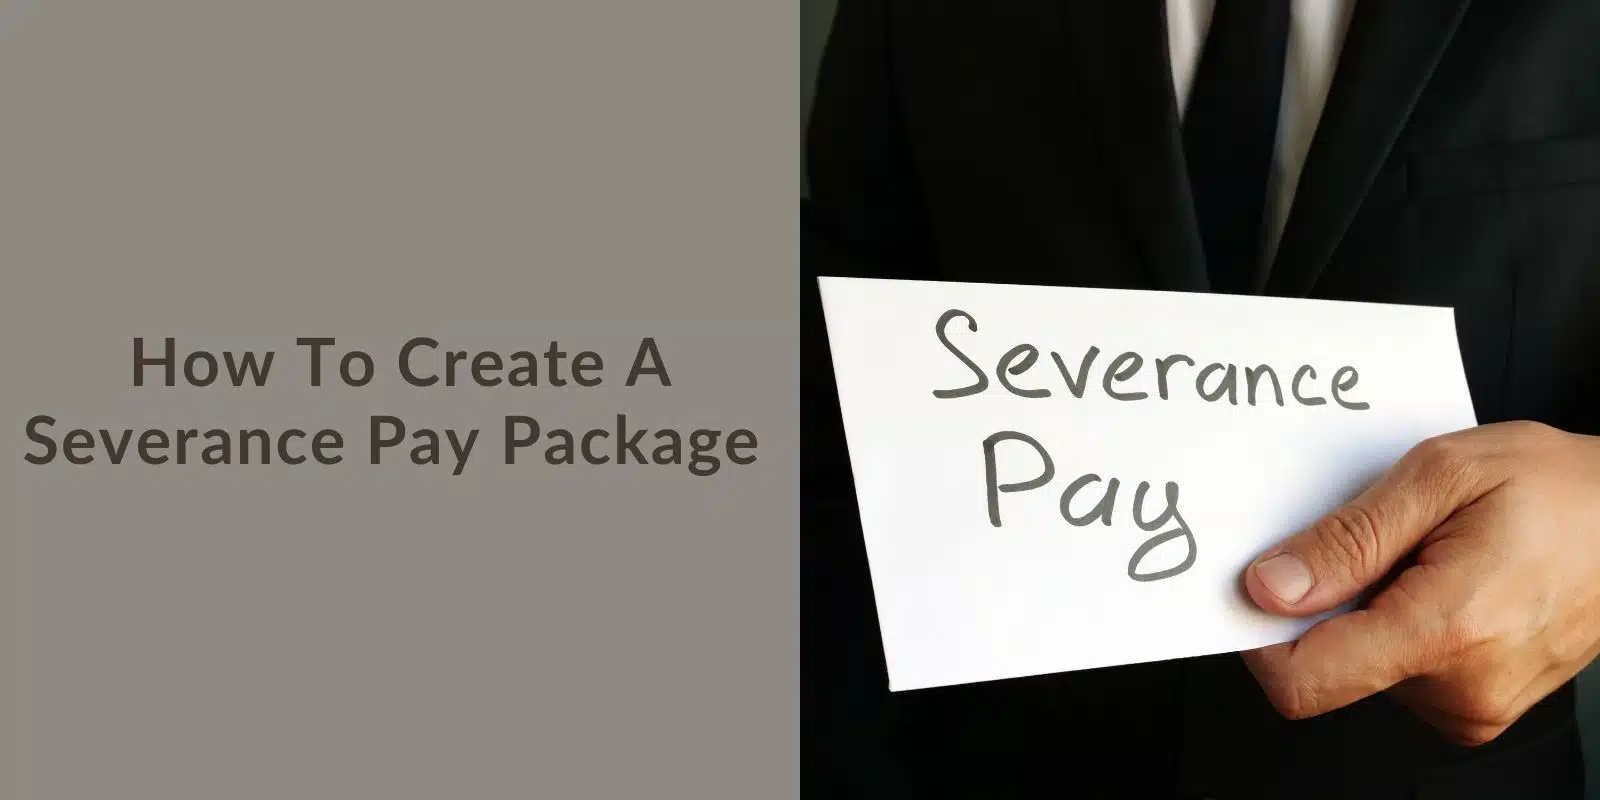 How To Create A Severance Pay Package